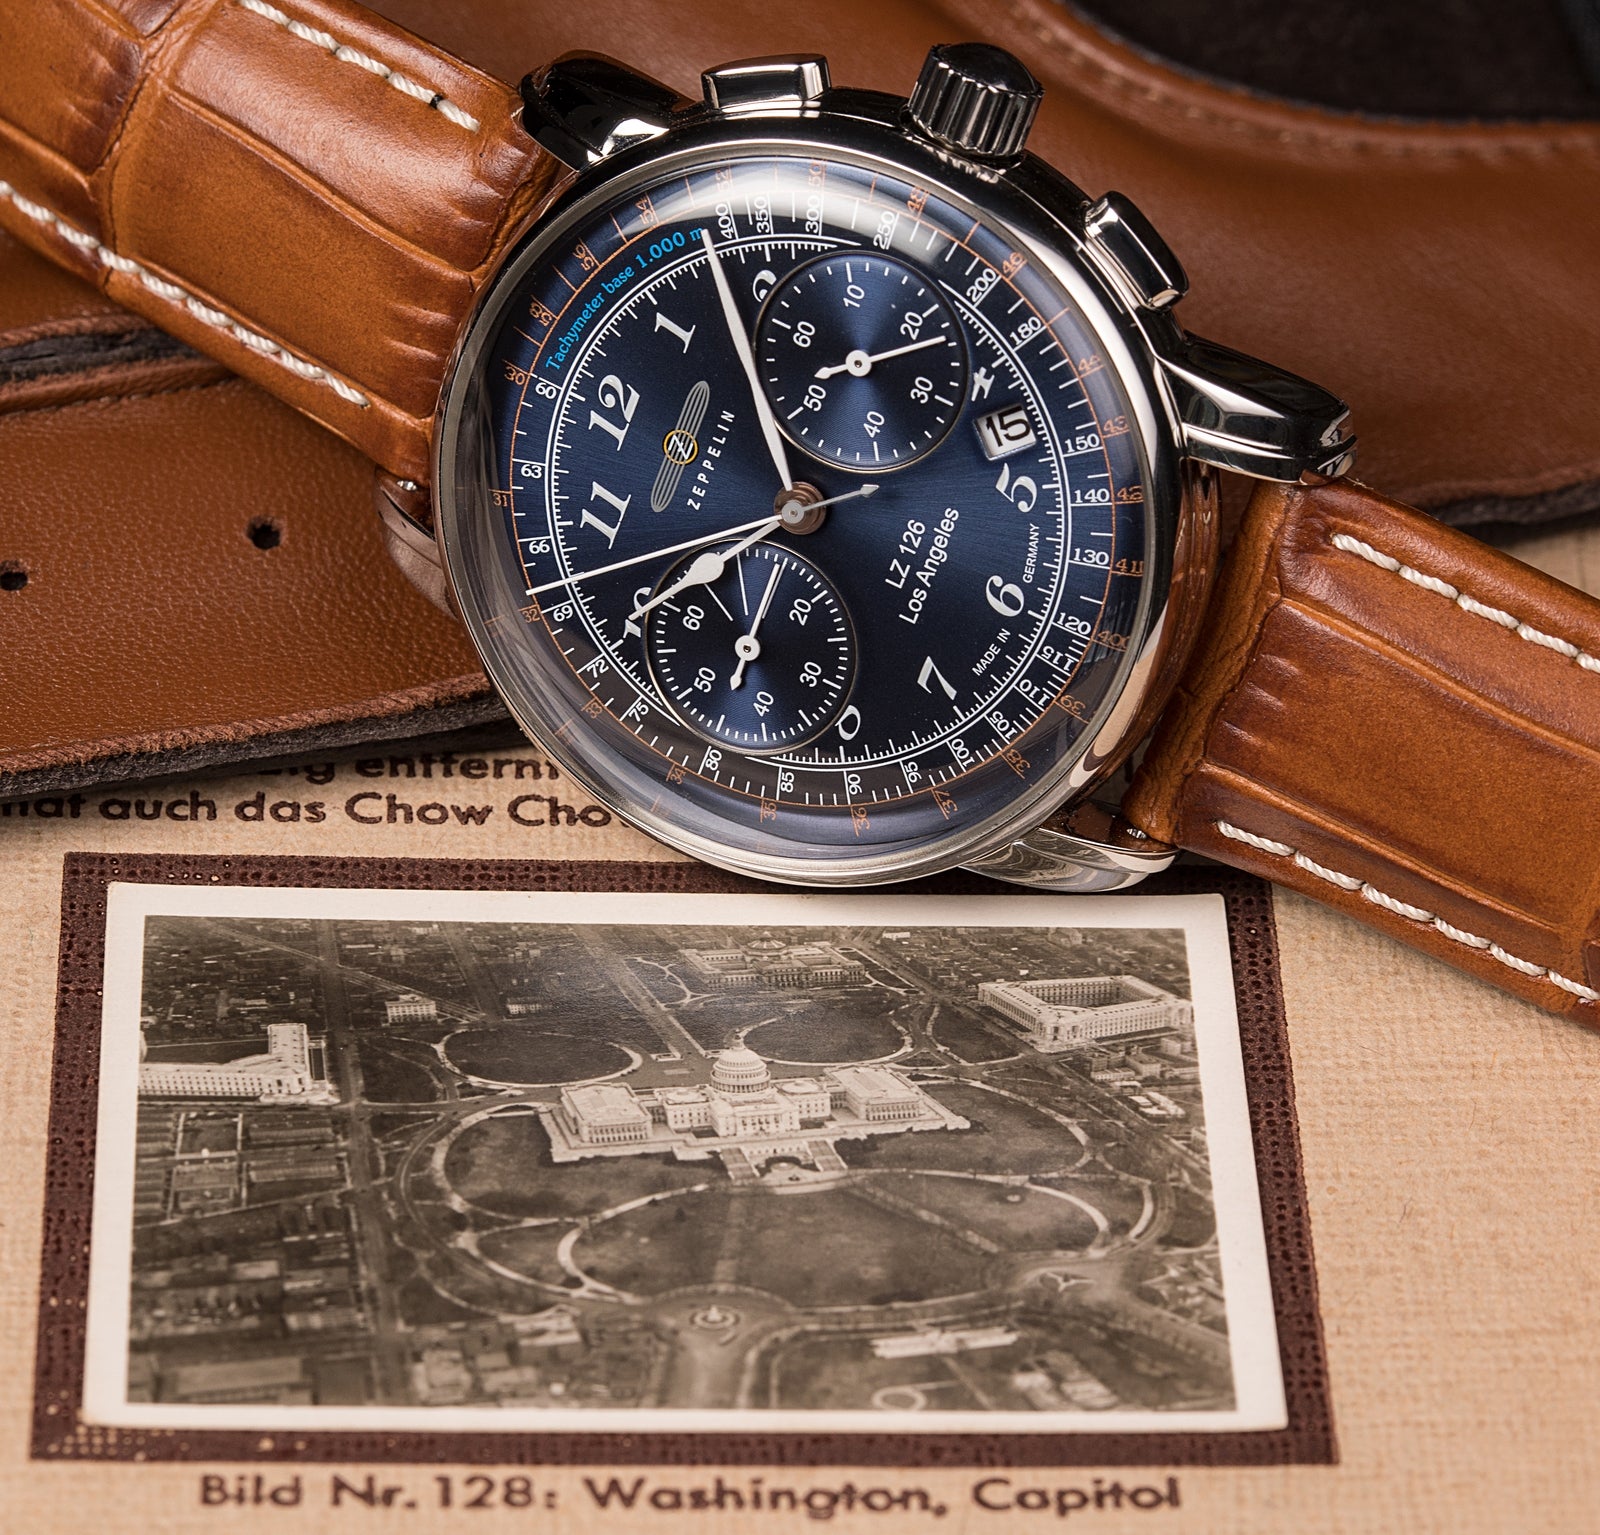 ZEPPELIN news: Watch | now with dial LZ126 blue Zeppelin coming WatchUSeek Los Forums Angeles chrono